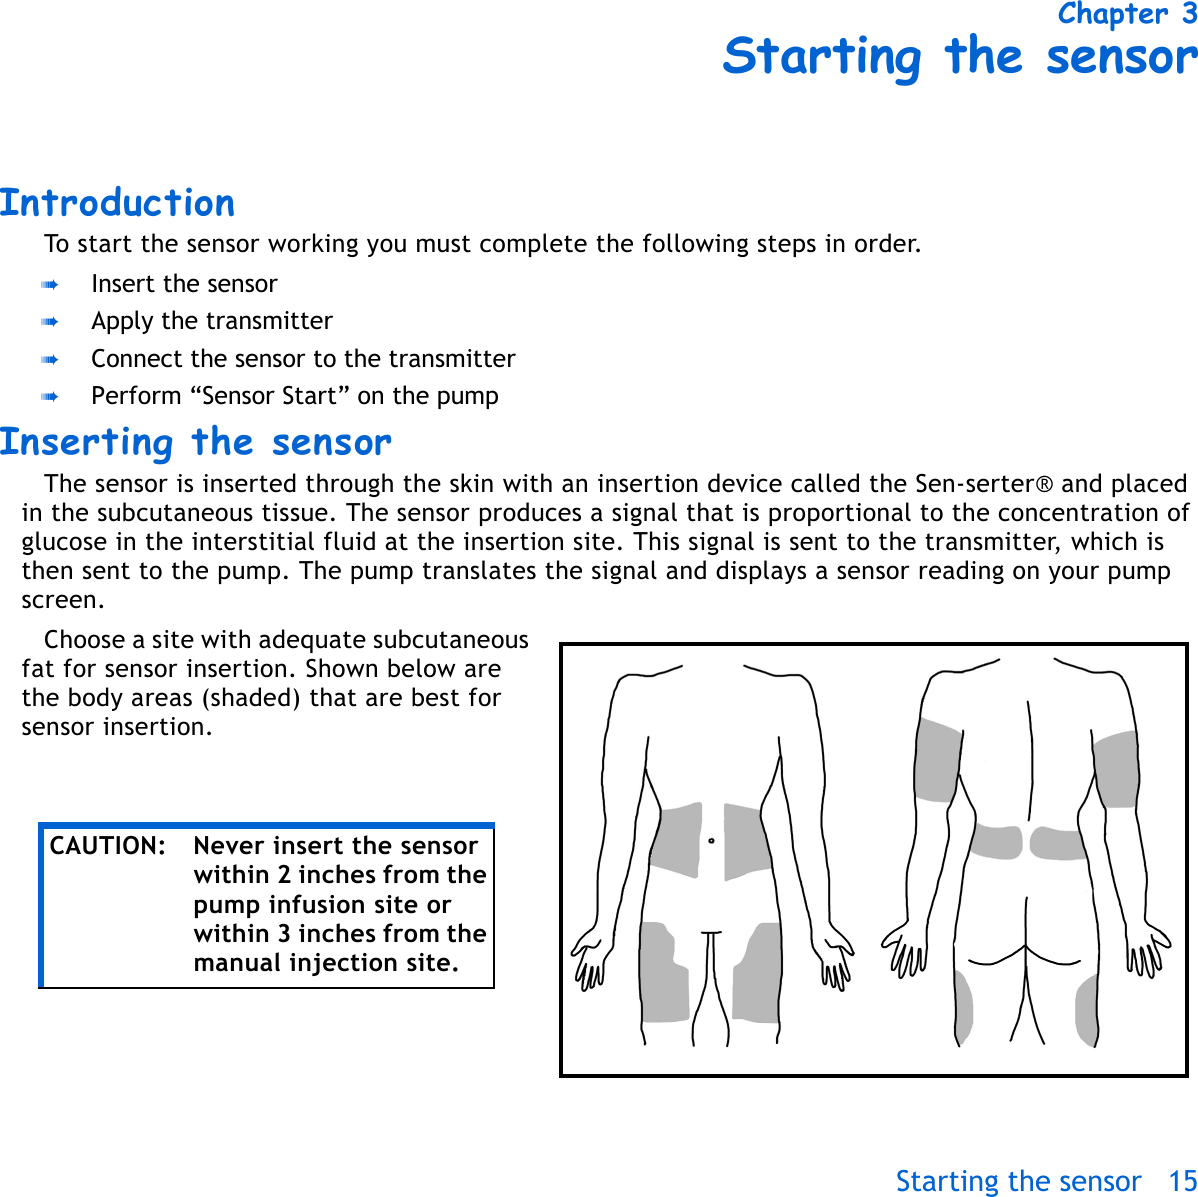 Starting the sensor 15 Chapter 3Starting the sensorIntroductionTo start the sensor working you must complete the following steps in order. ➠Insert the sensor➠Apply the transmitter➠Connect the sensor to the transmitter➠Perform “Sensor Start” on the pumpInserting the sensor The sensor is inserted through the skin with an insertion device called the Sen-serter® and placed in the subcutaneous tissue. The sensor produces a signal that is proportional to the concentration of glucose in the interstitial fluid at the insertion site. This signal is sent to the transmitter, which is then sent to the pump. The pump translates the signal and displays a sensor reading on your pump screen.Choose a site with adequate subcutaneous fat for sensor insertion. Shown below are the body areas (shaded) that are best for sensor insertion.CAUTION: Never insert the sensor within 2 inches from the pump infusion site or within 3 inches from the manual injection site.